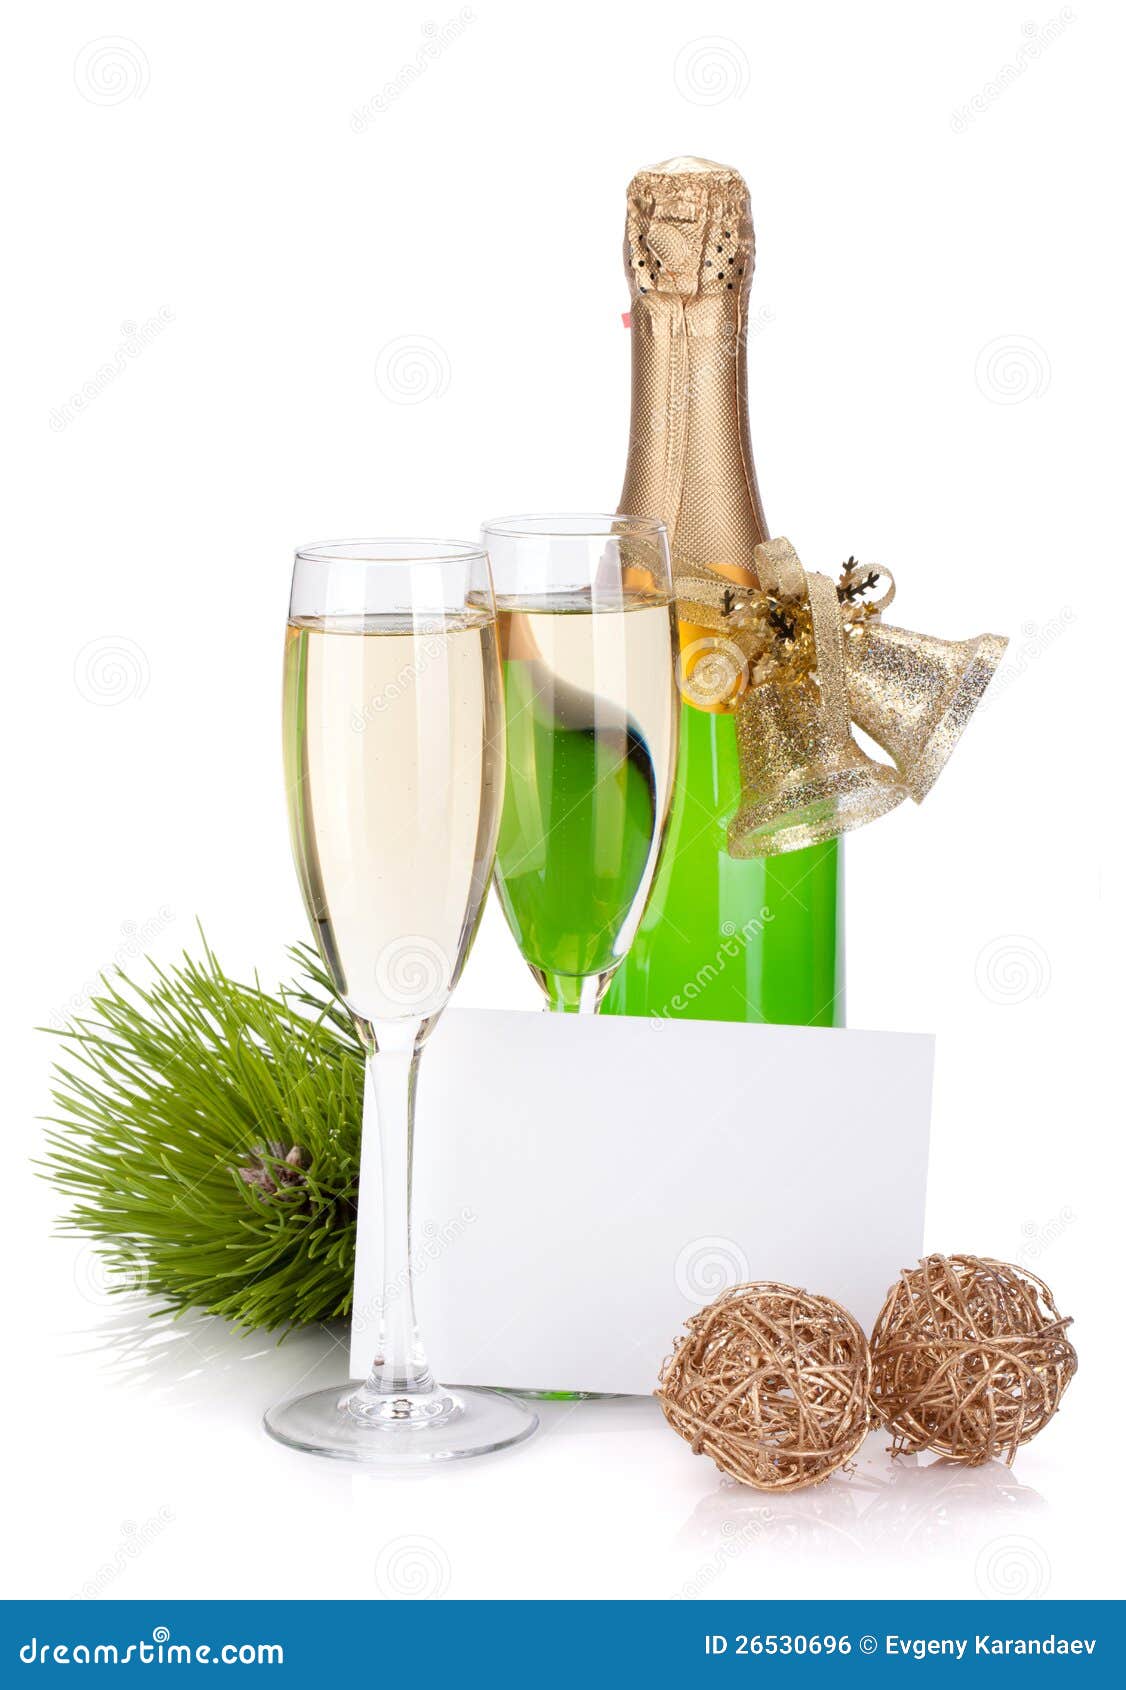 Champagne Bottle, Glasses and Empty Card Stock Photo - Image of card ...